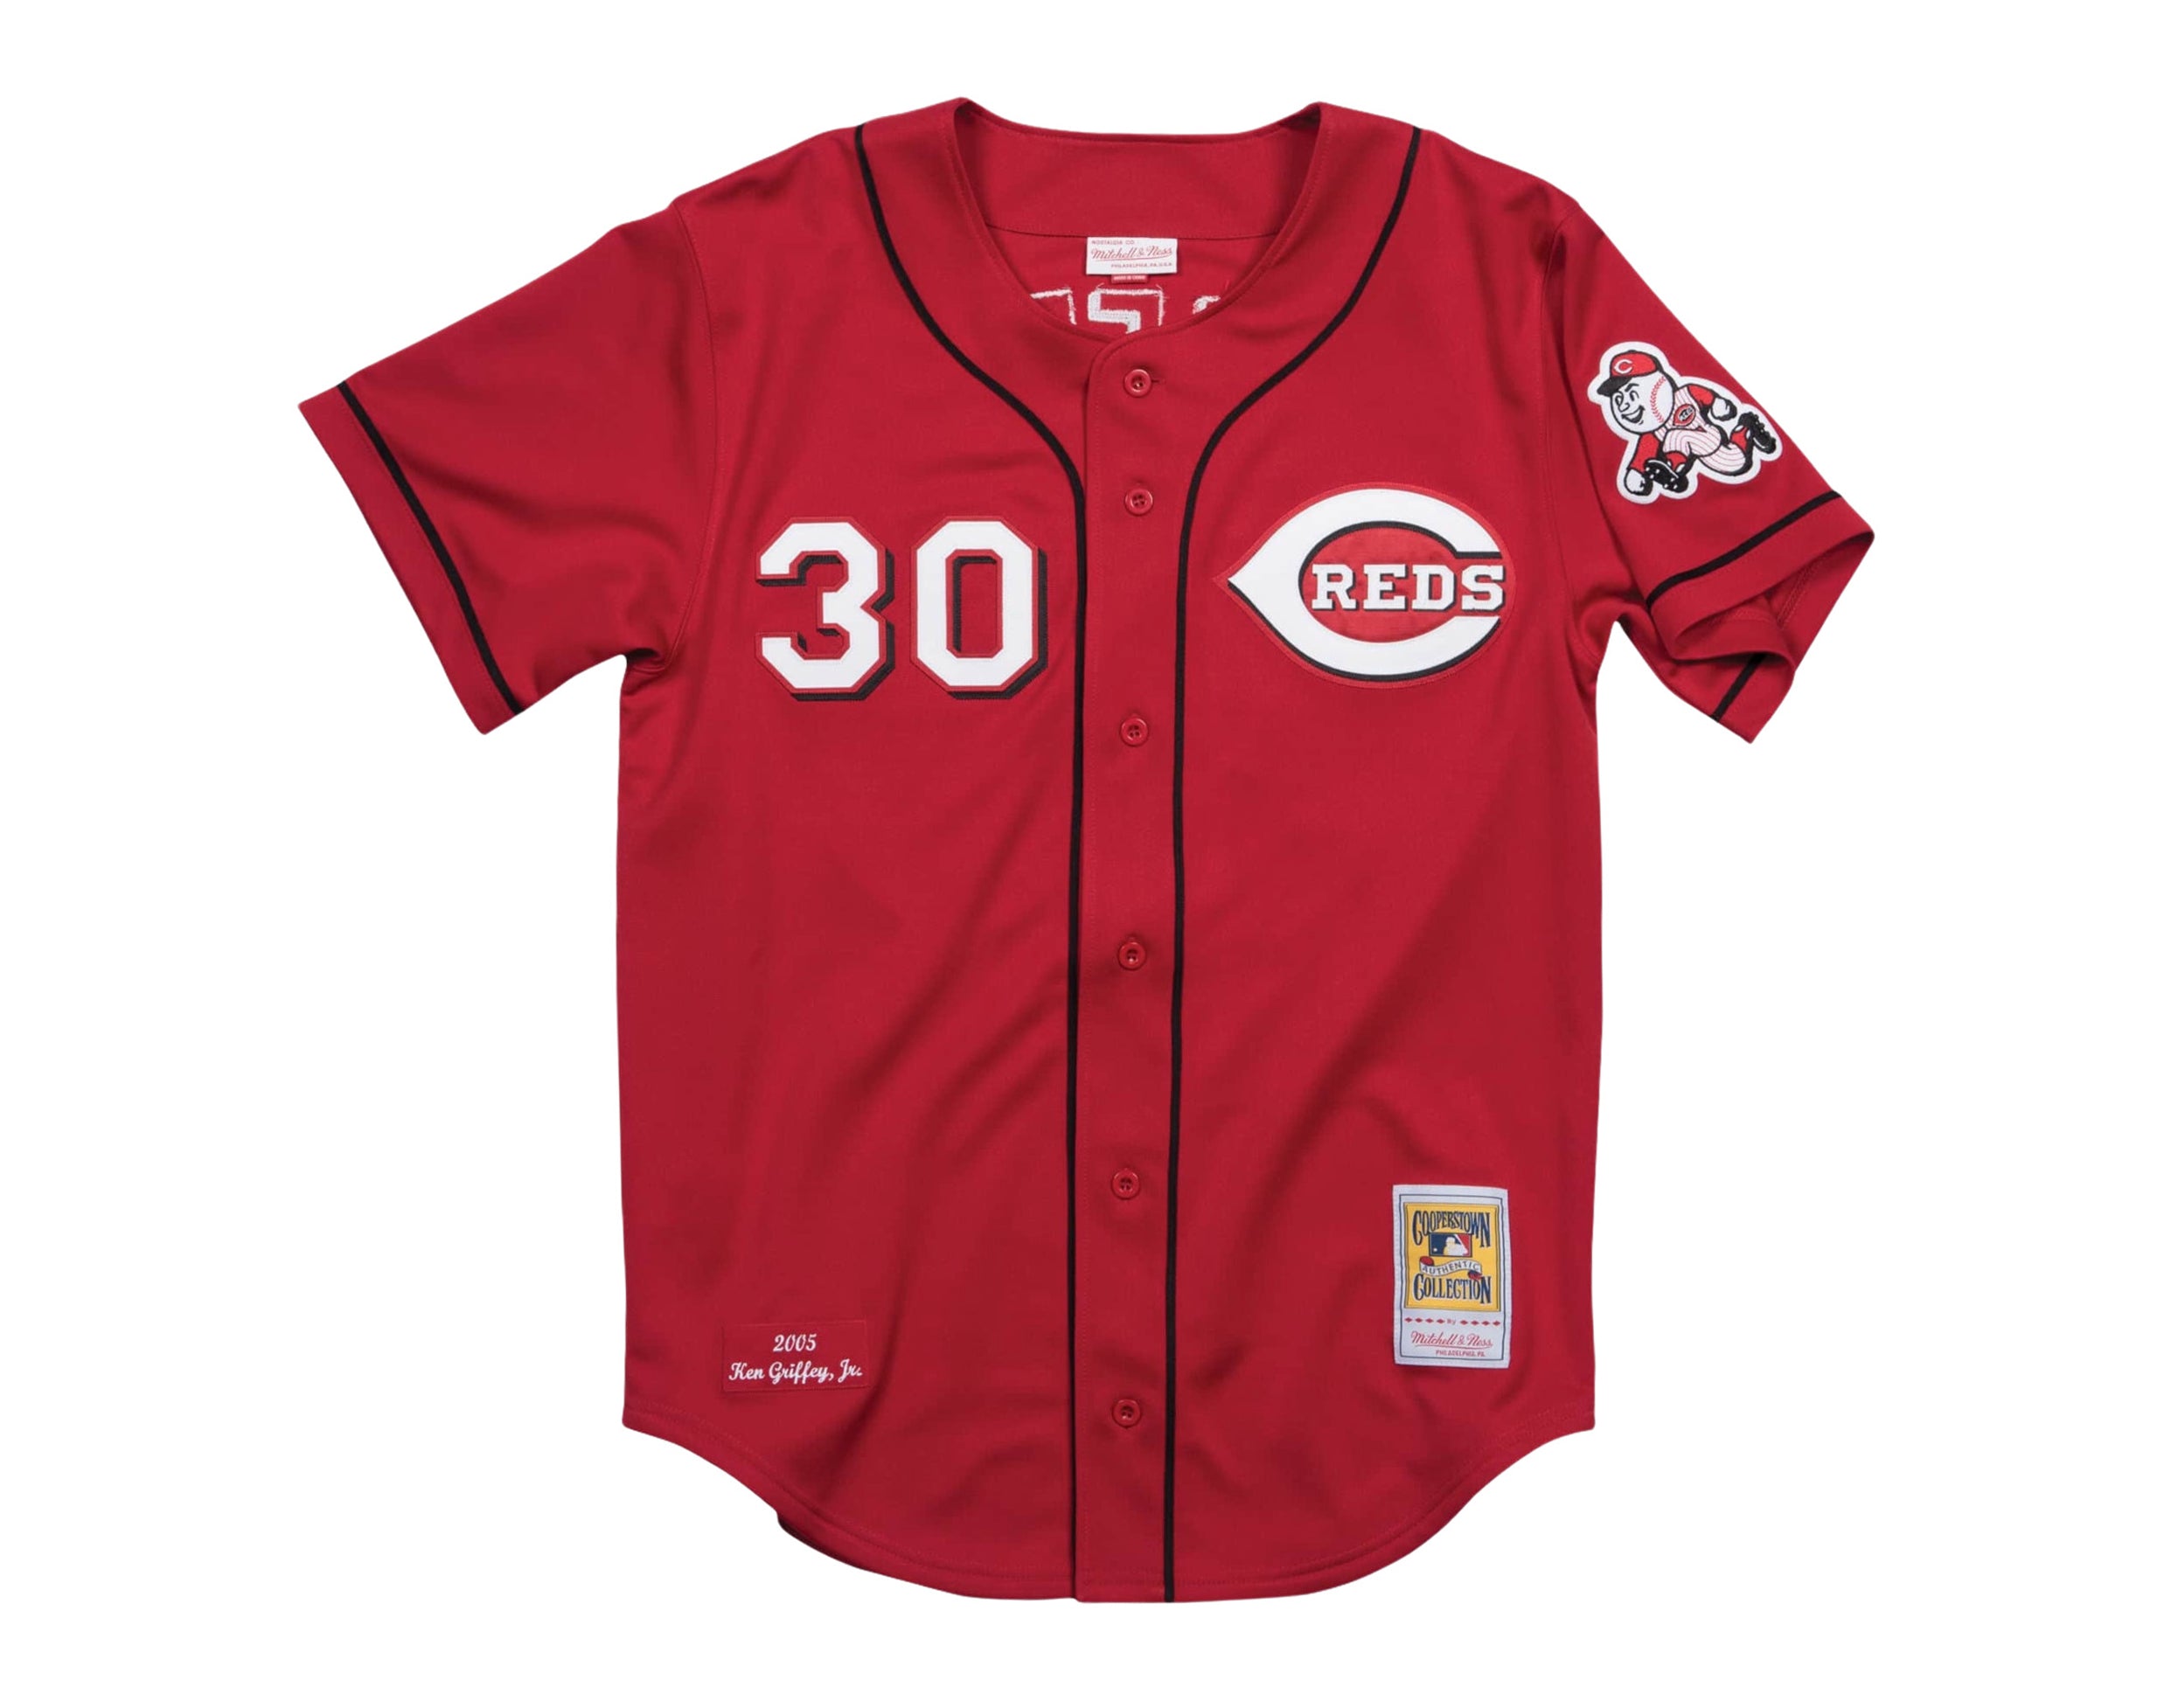 mitchell and ness reds